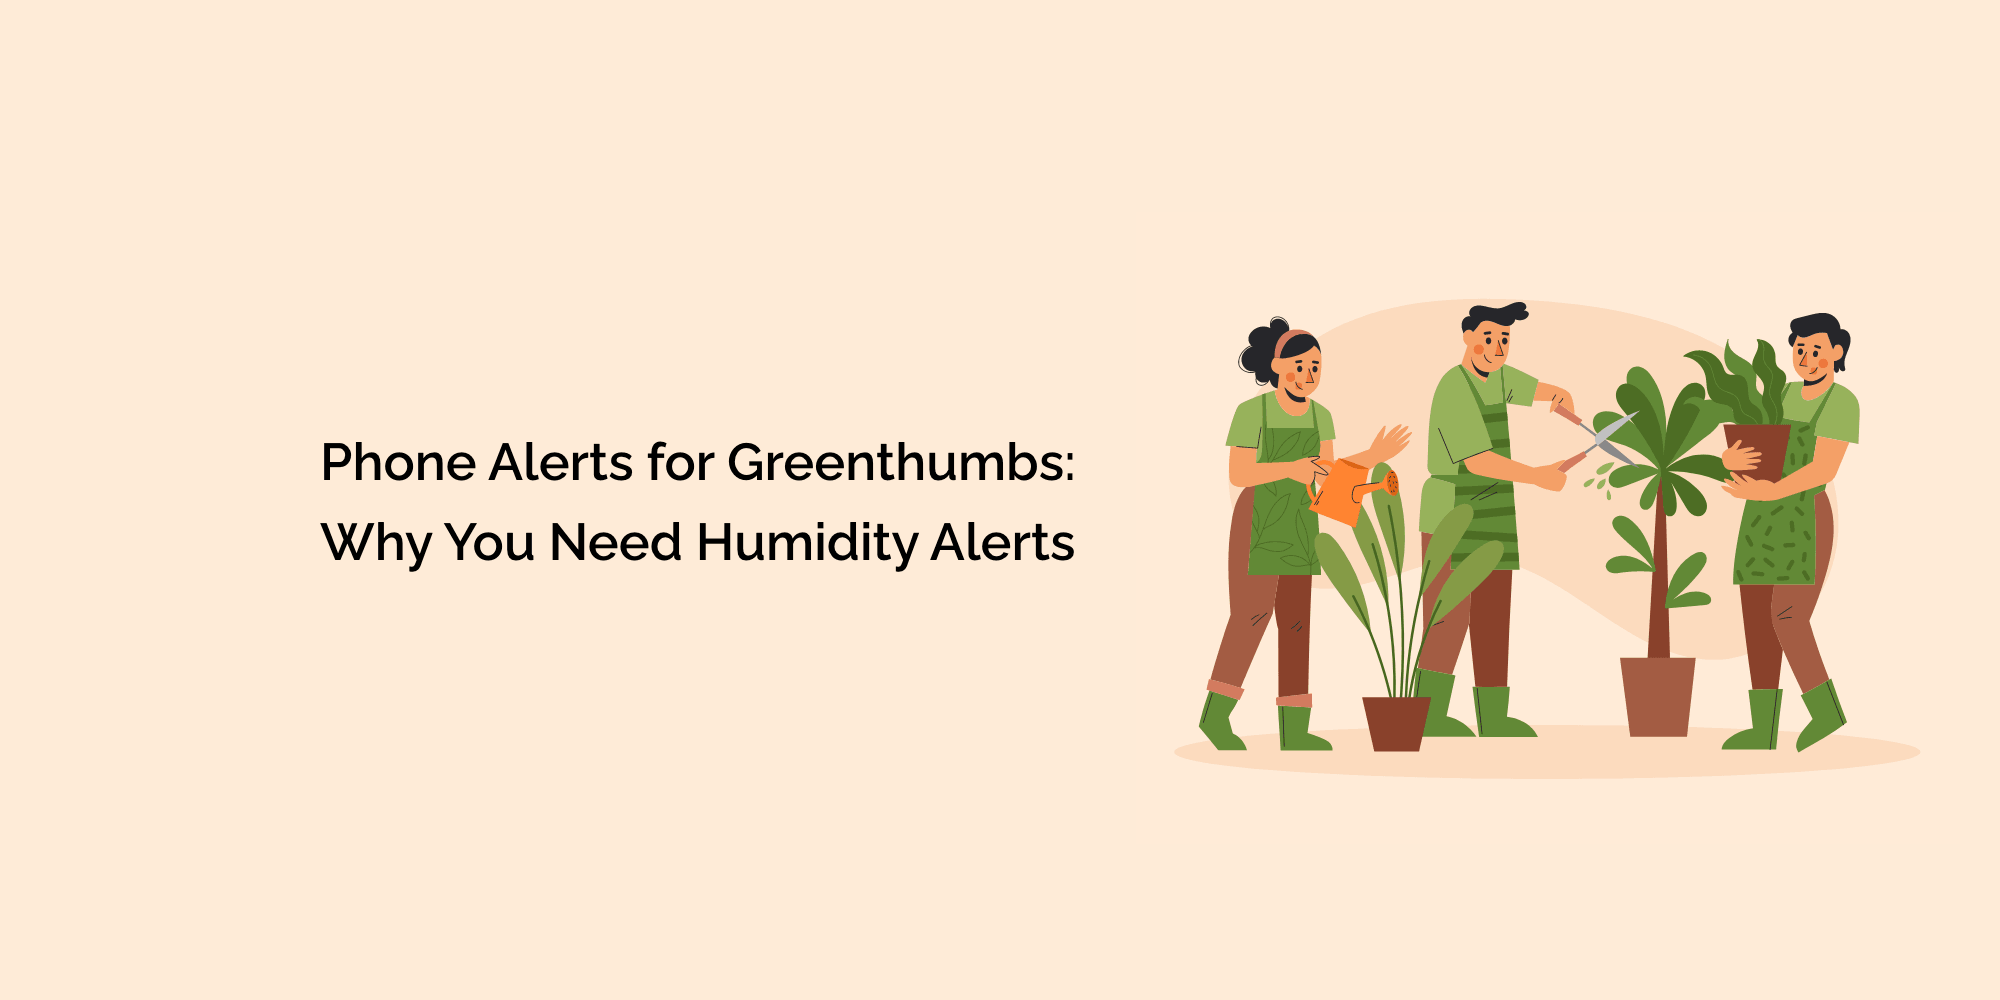 Phone Alerts for Greenthumbs: Why You Need Humidity Alerts